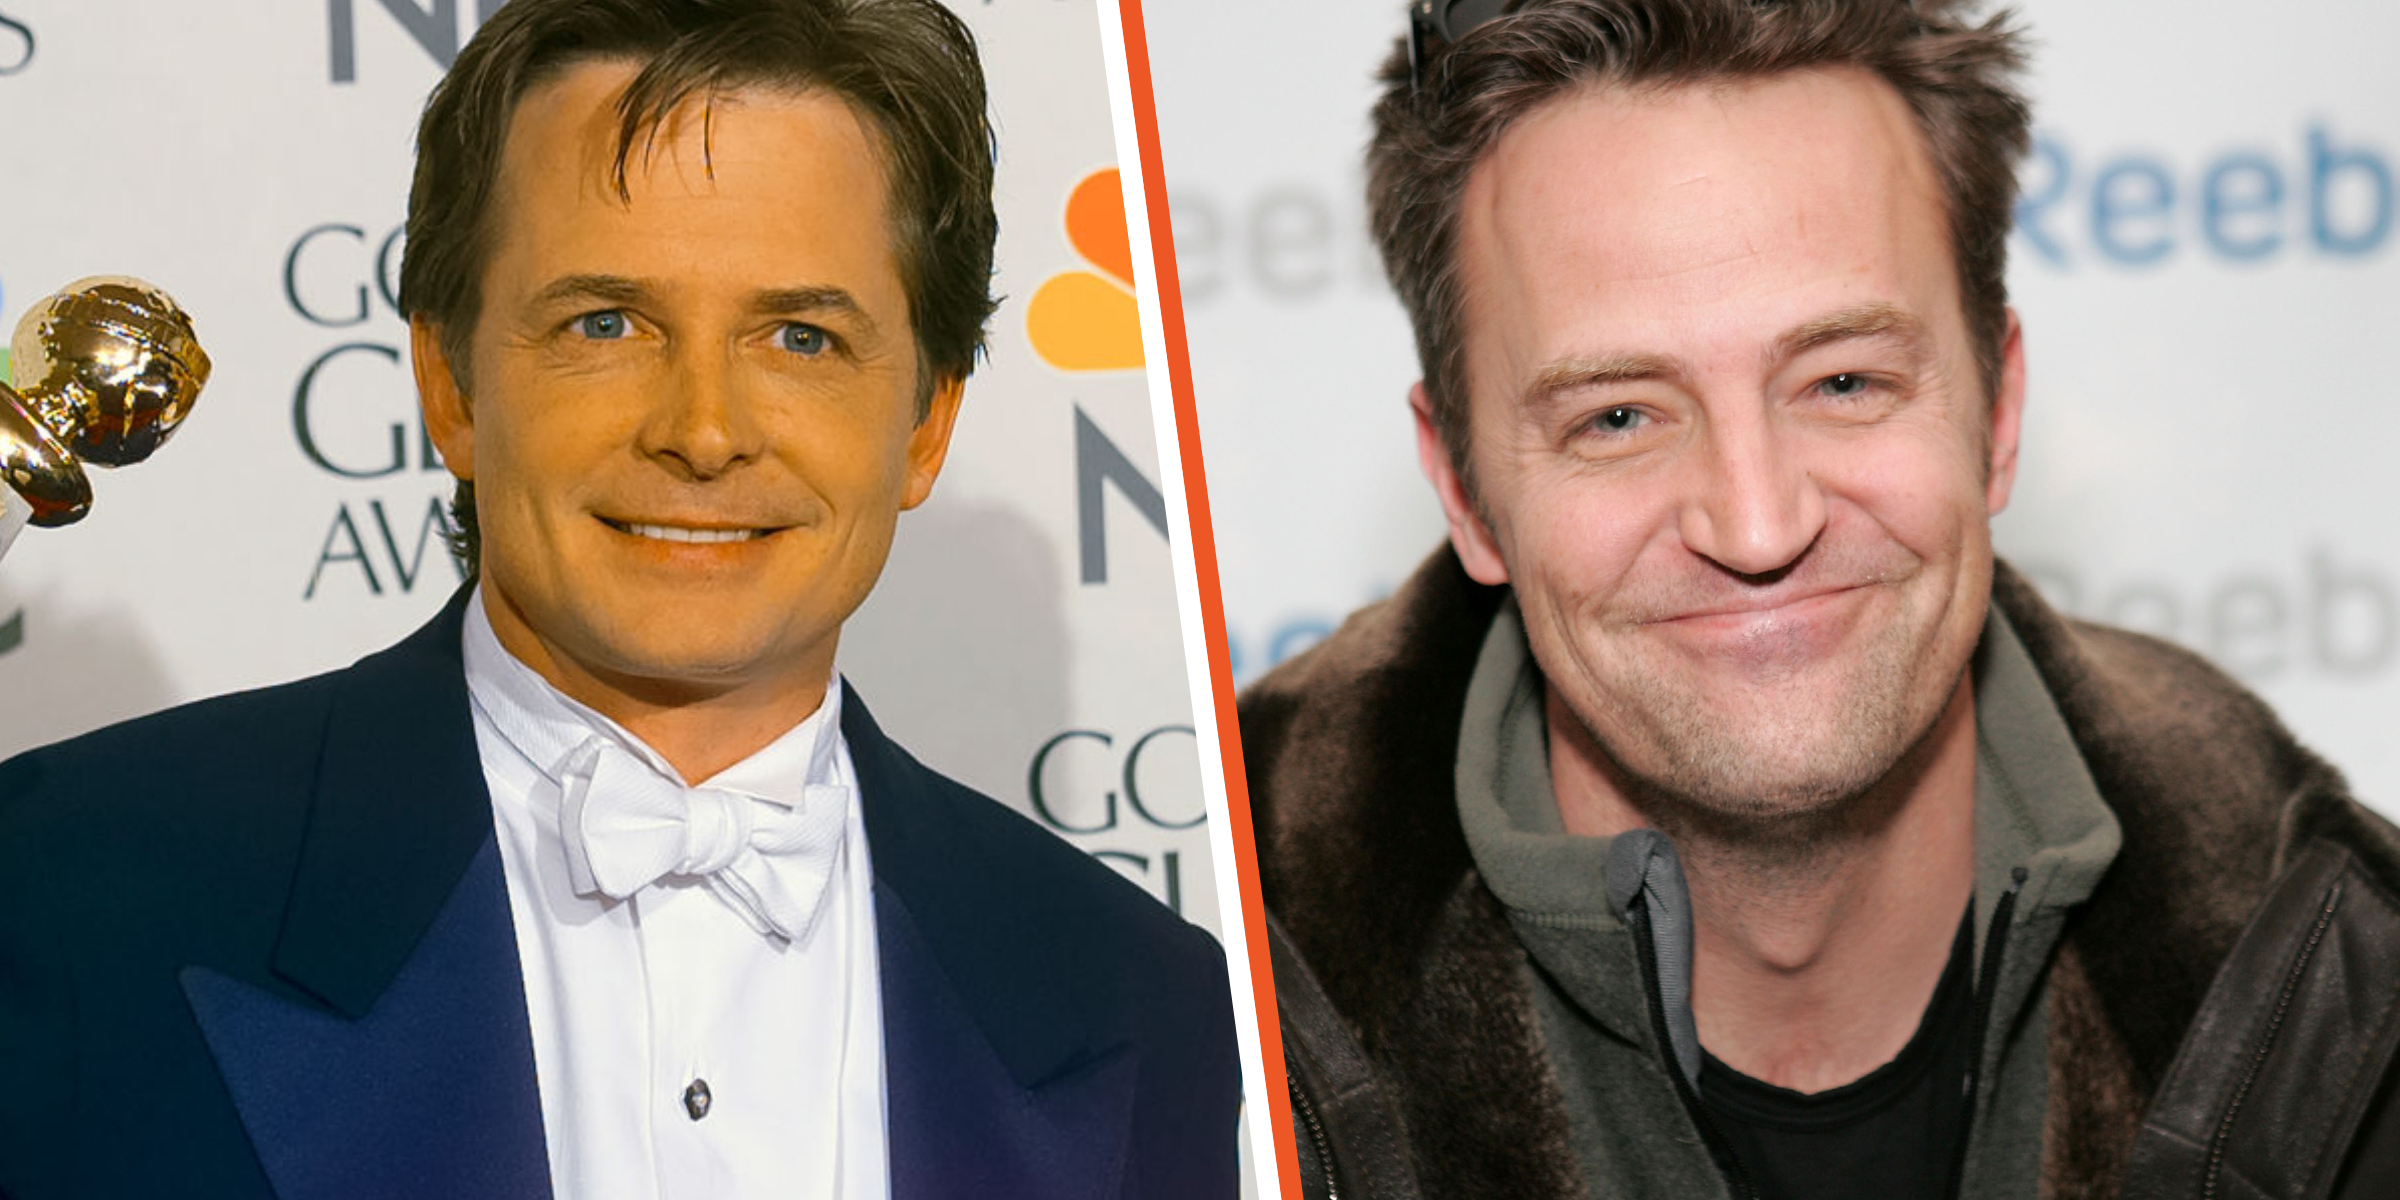 Michael J. Fox (L) and Matthew Perry (R) | Source: Getty Images